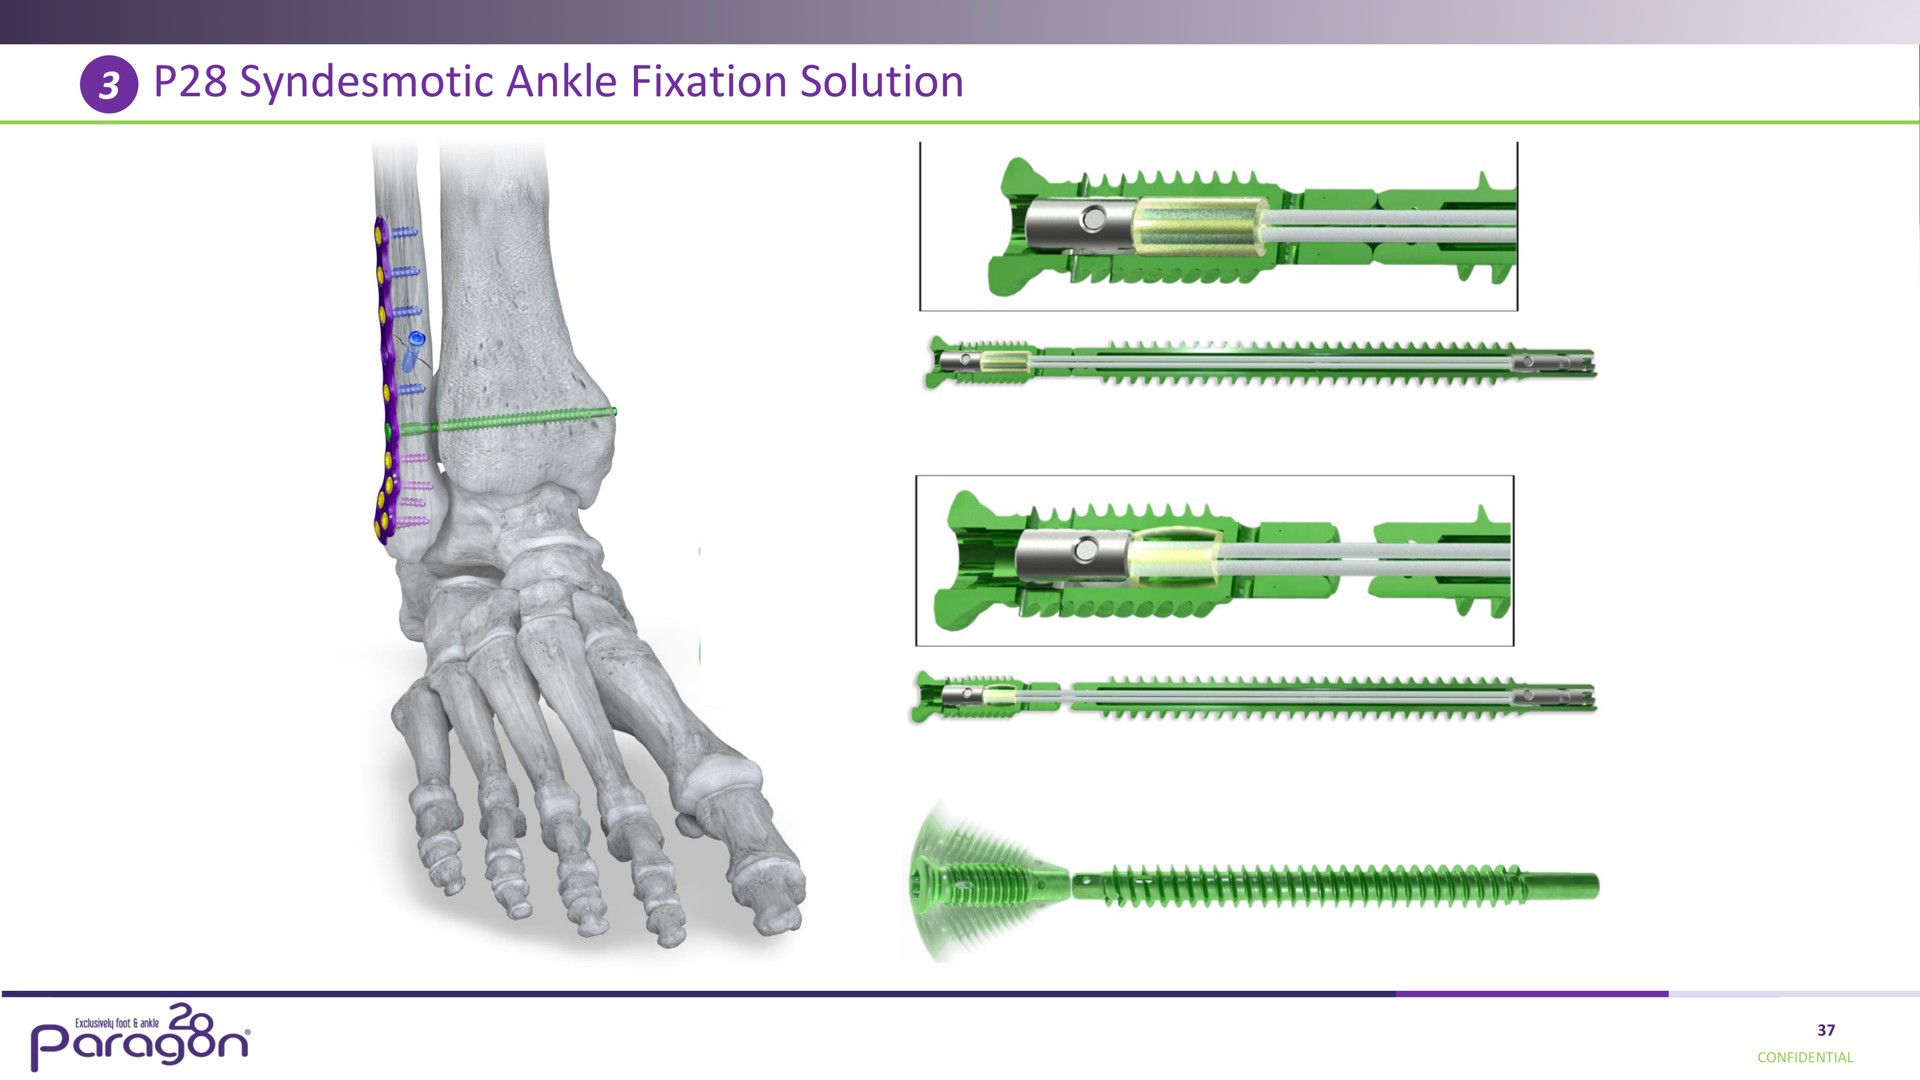 syndesmotic ankle fixation solution i paragon | Paragon28